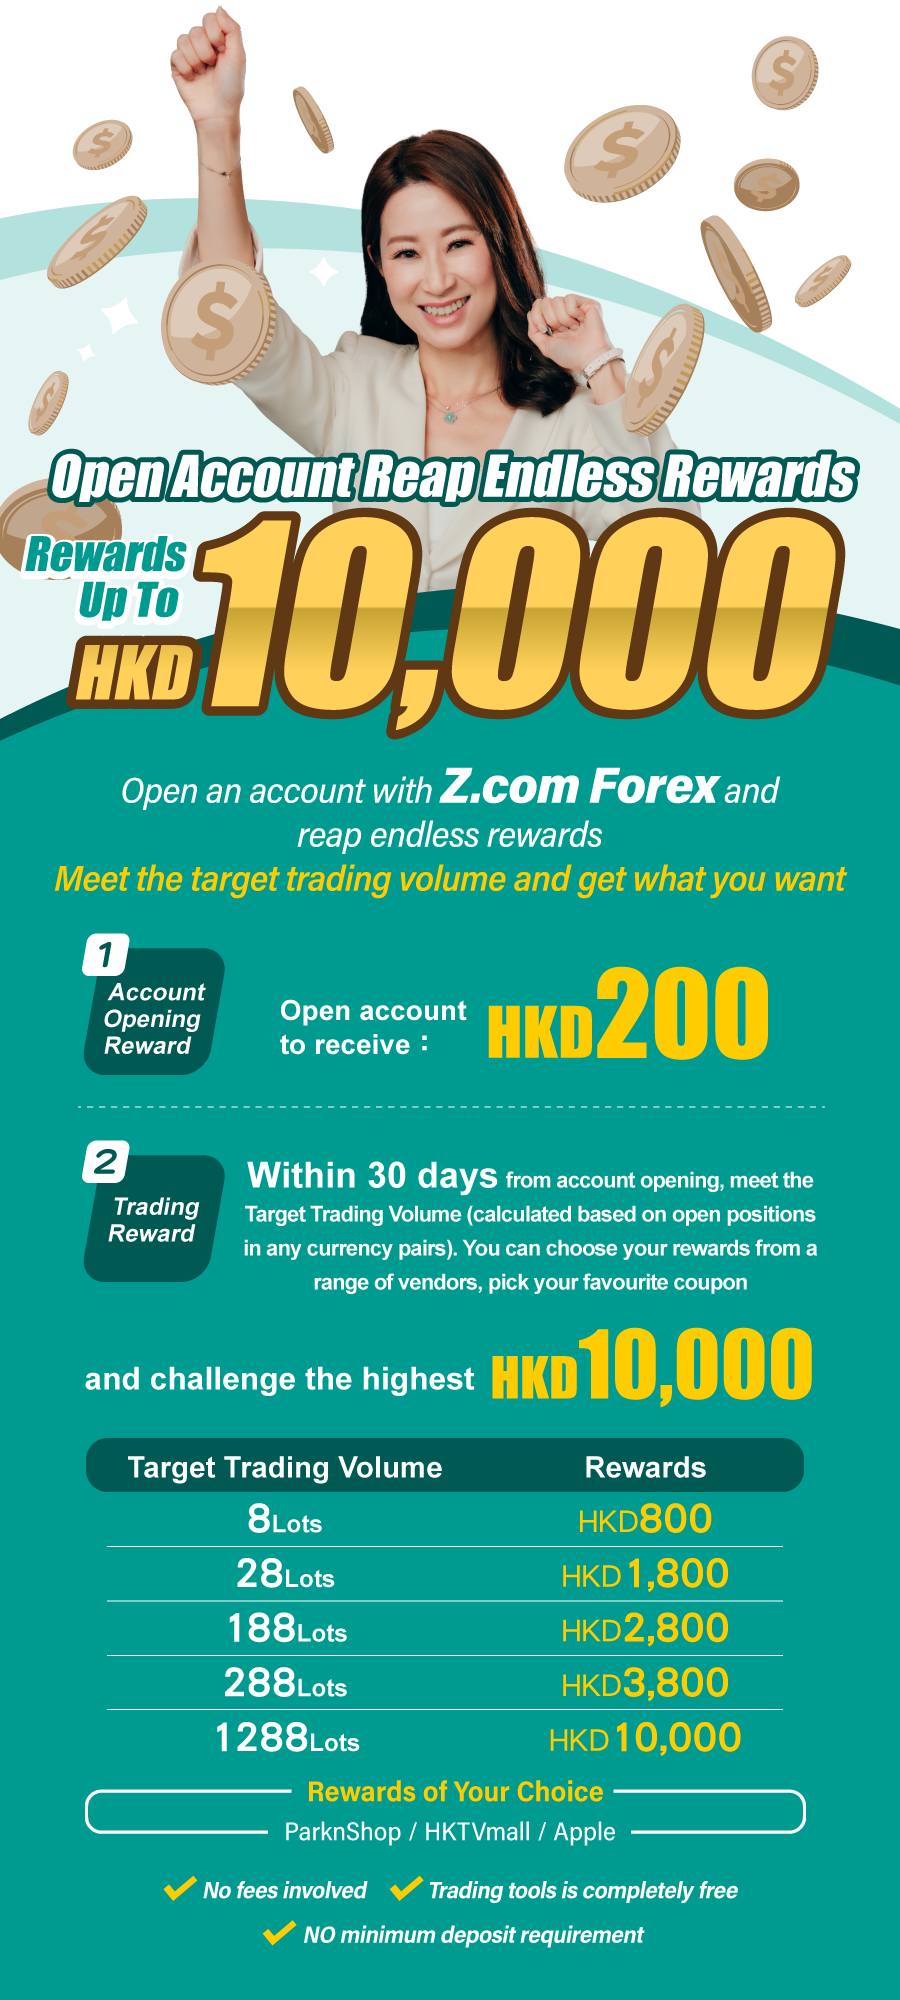 Open Account and Reap Endless Rewards！Rewards Up To HKD10,000